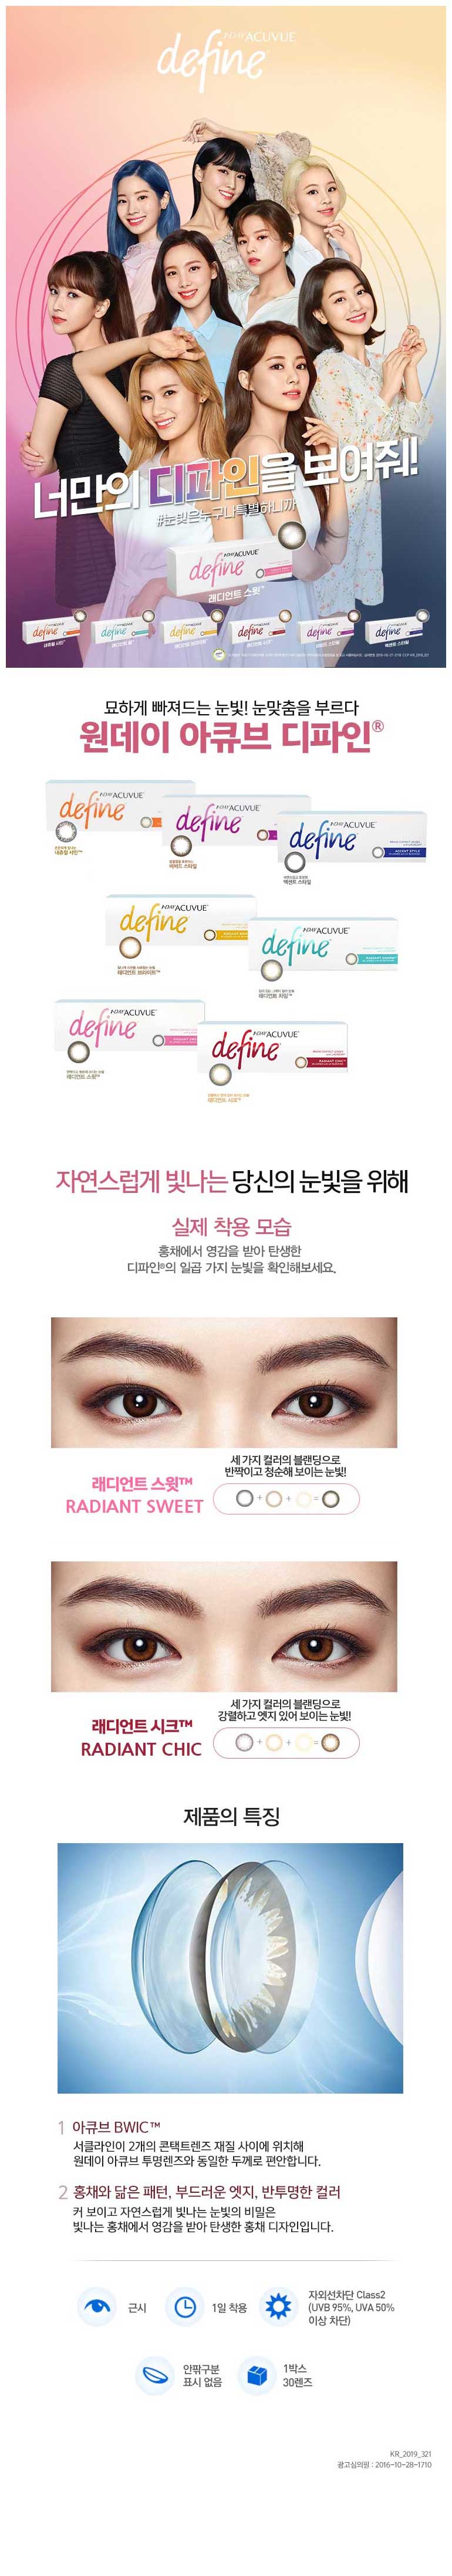 Description-image-of-Acuvue-1Day-New-Define-30pcs-Radiant-Sweet-Radiant-Chic-Colored-Contacts